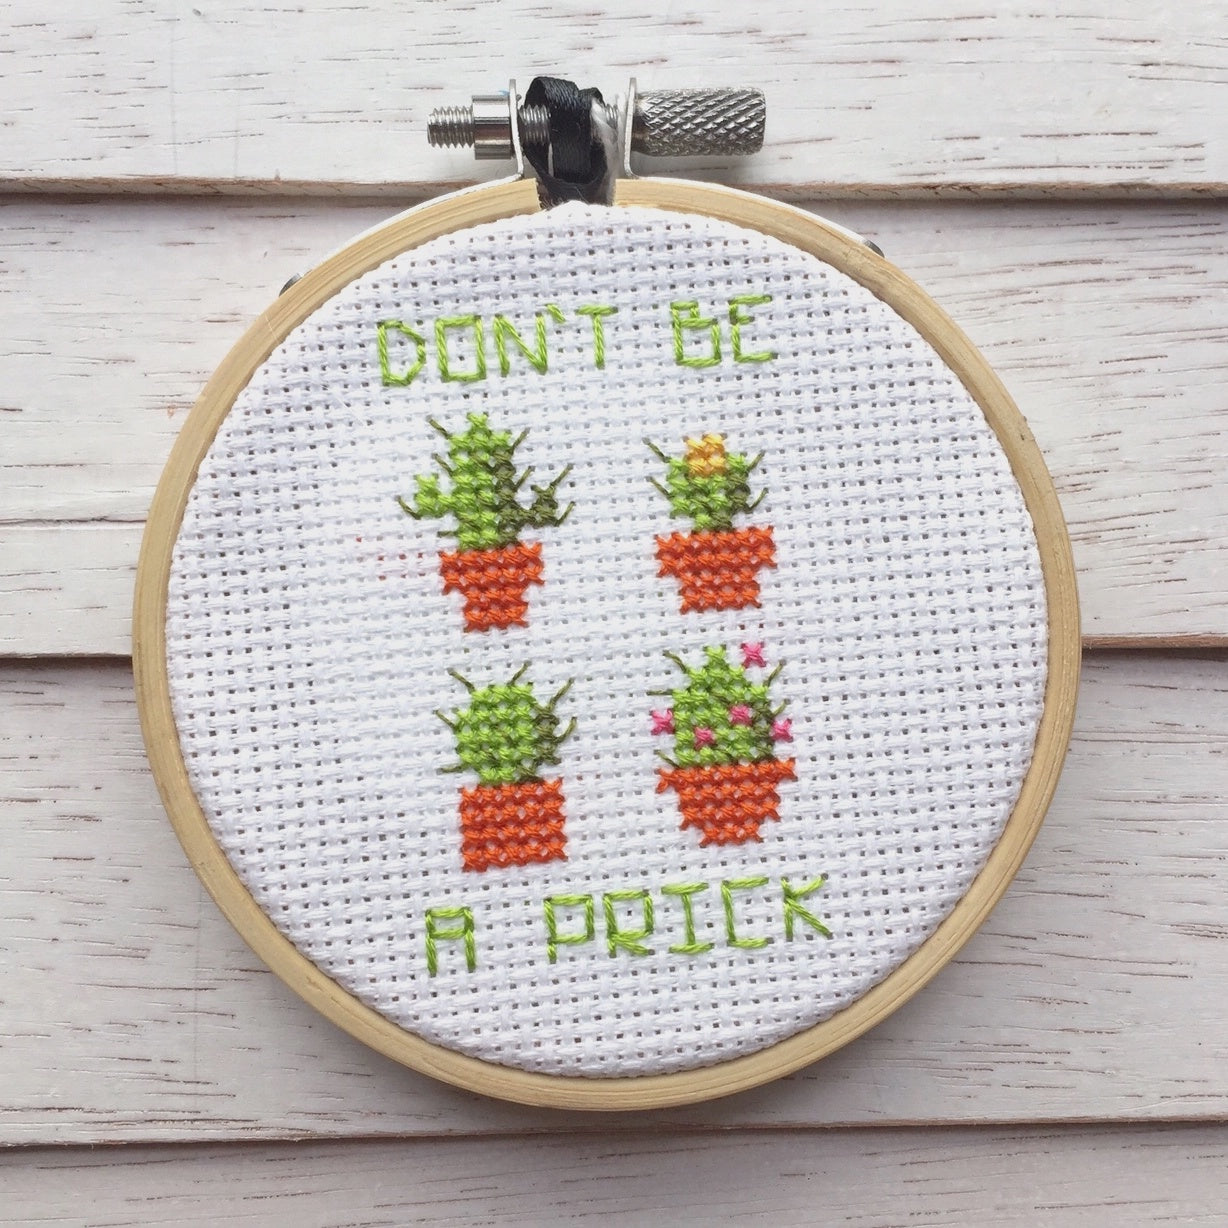 Don’t Be A Prick Counted Cross Stitch Kit